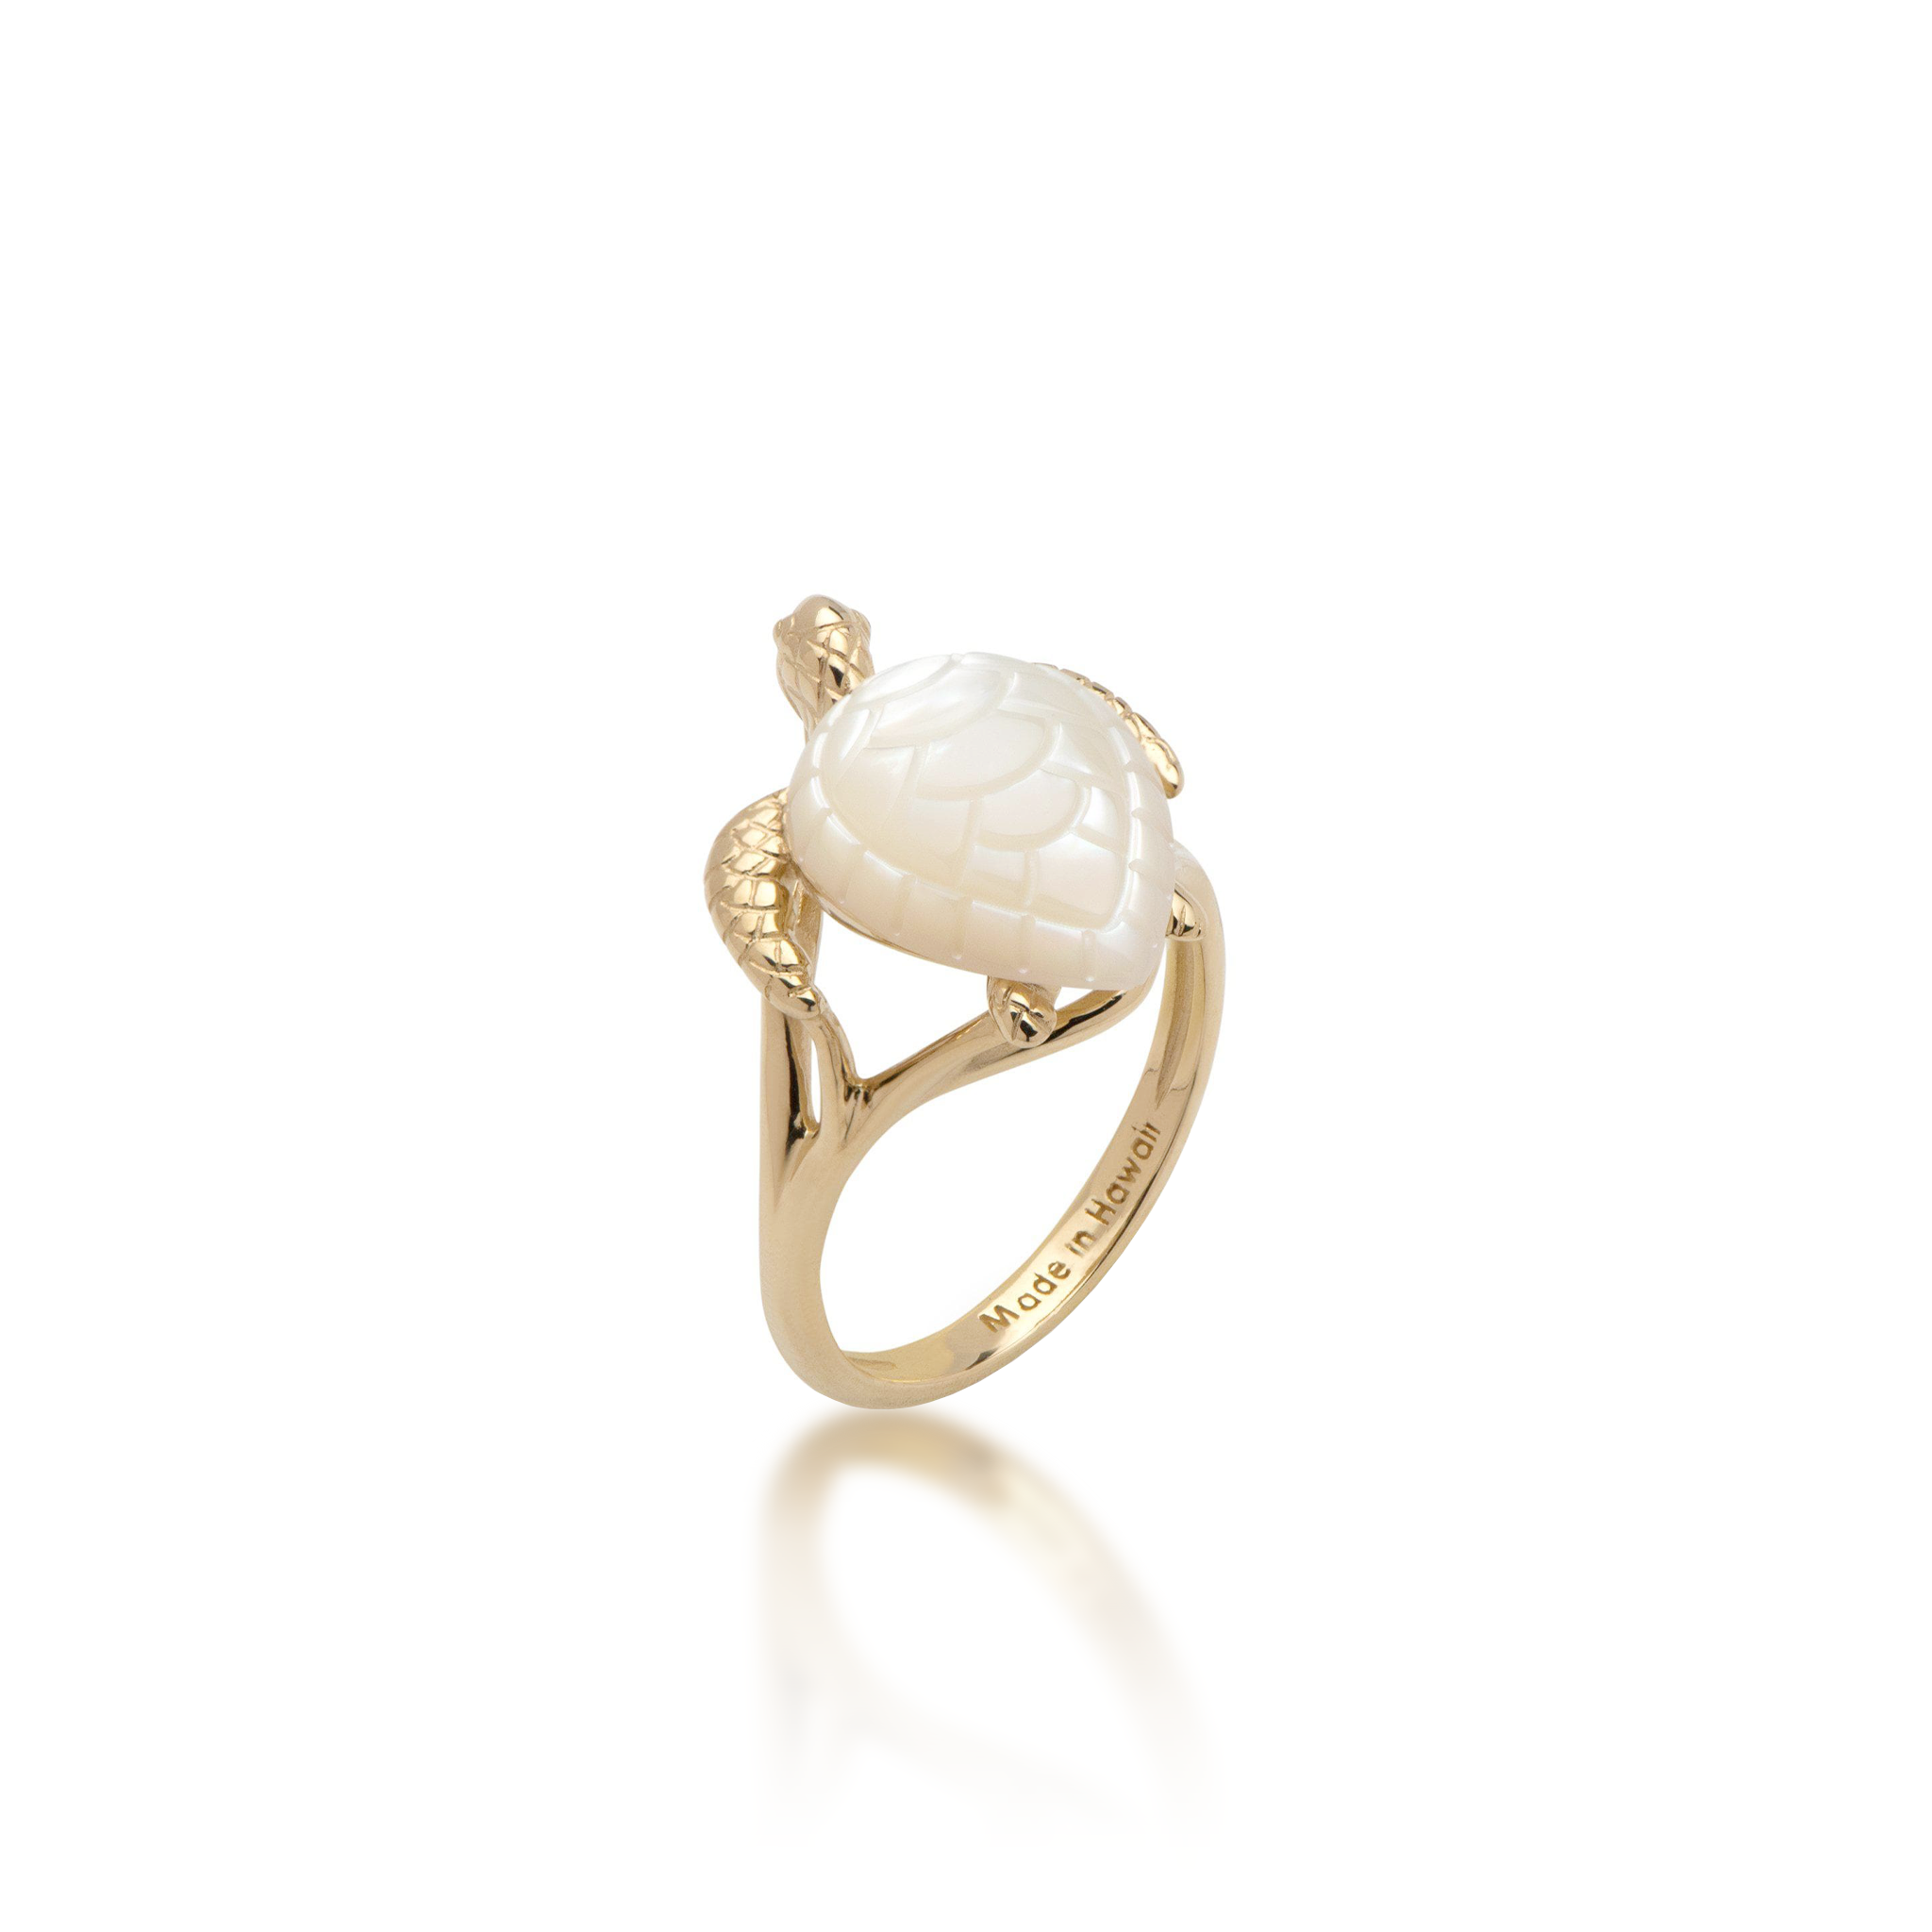 Honu Mother of Pearl Ring in Gold - 14mm